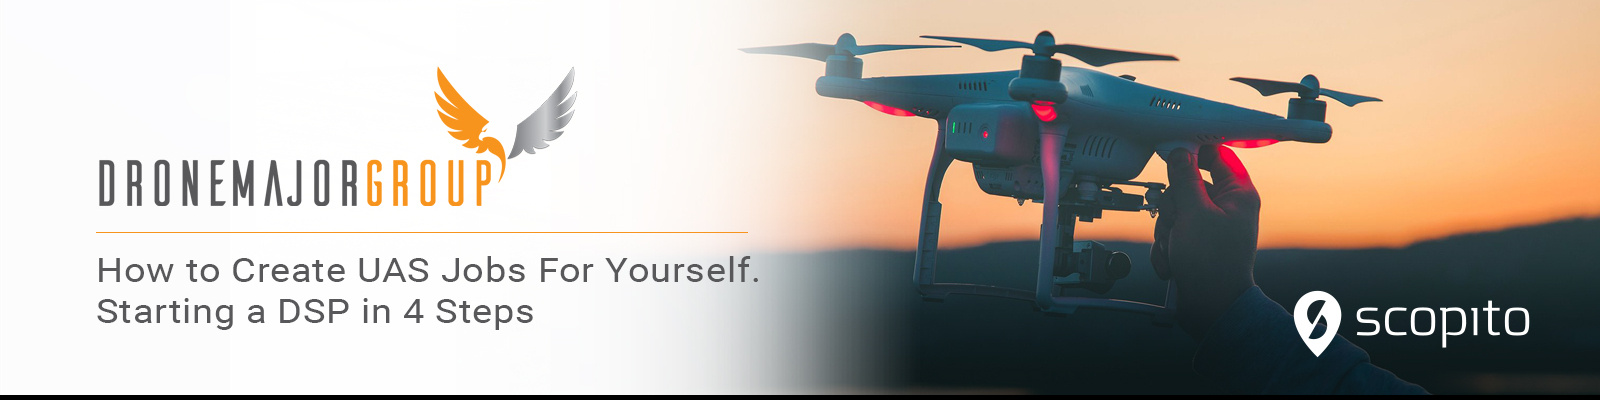 How to create UAS jobs for yourself. Starting a DSP in 4 steps